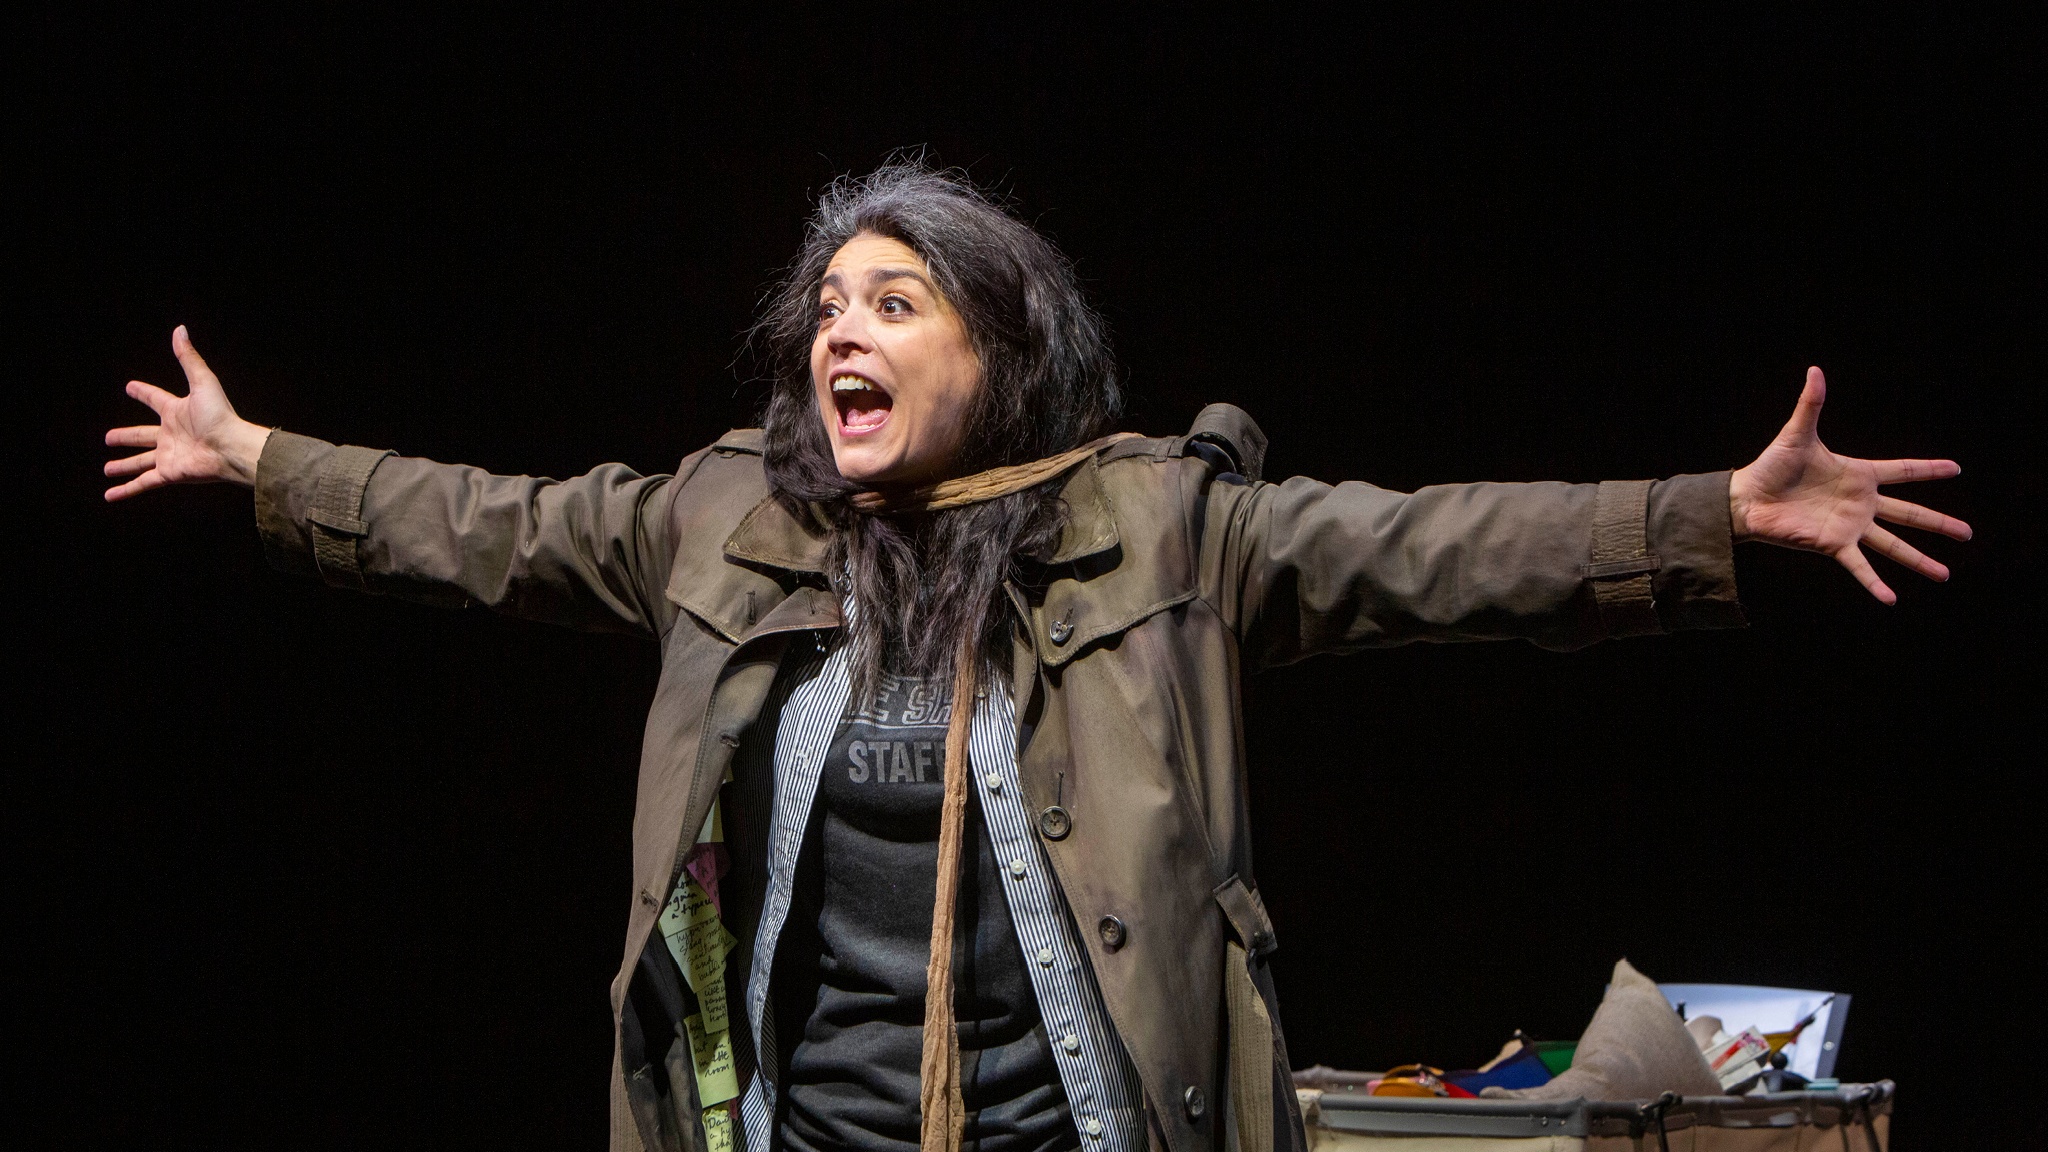 The performer Cecily Strong on a black box theater stage wearing a wig with graying hair, a brown trench coat, and holding her arms outstretched